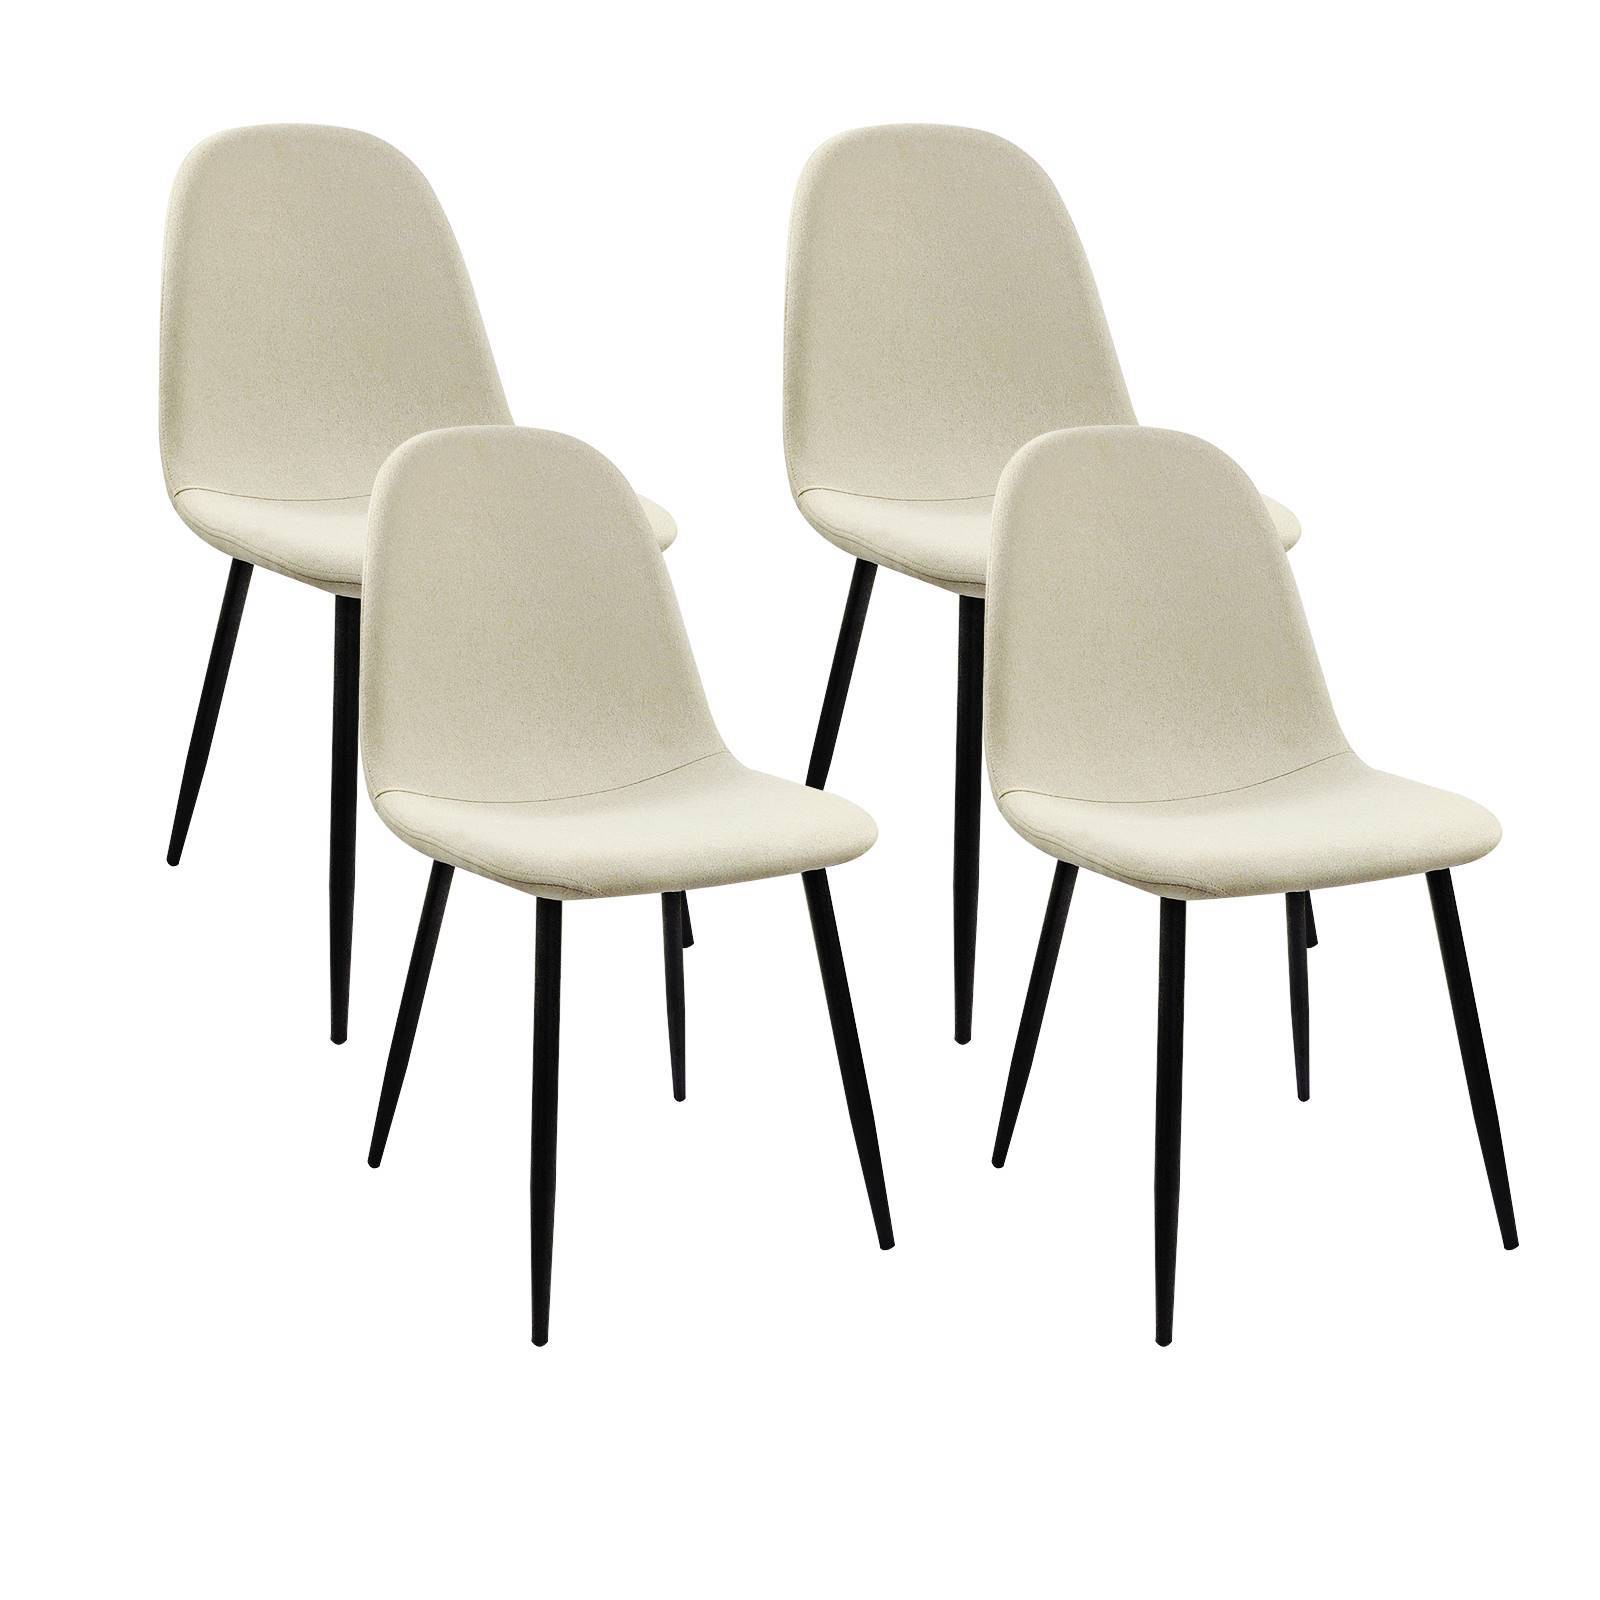 Dining Chairs Set Of 4, Modern Accent Chairs With